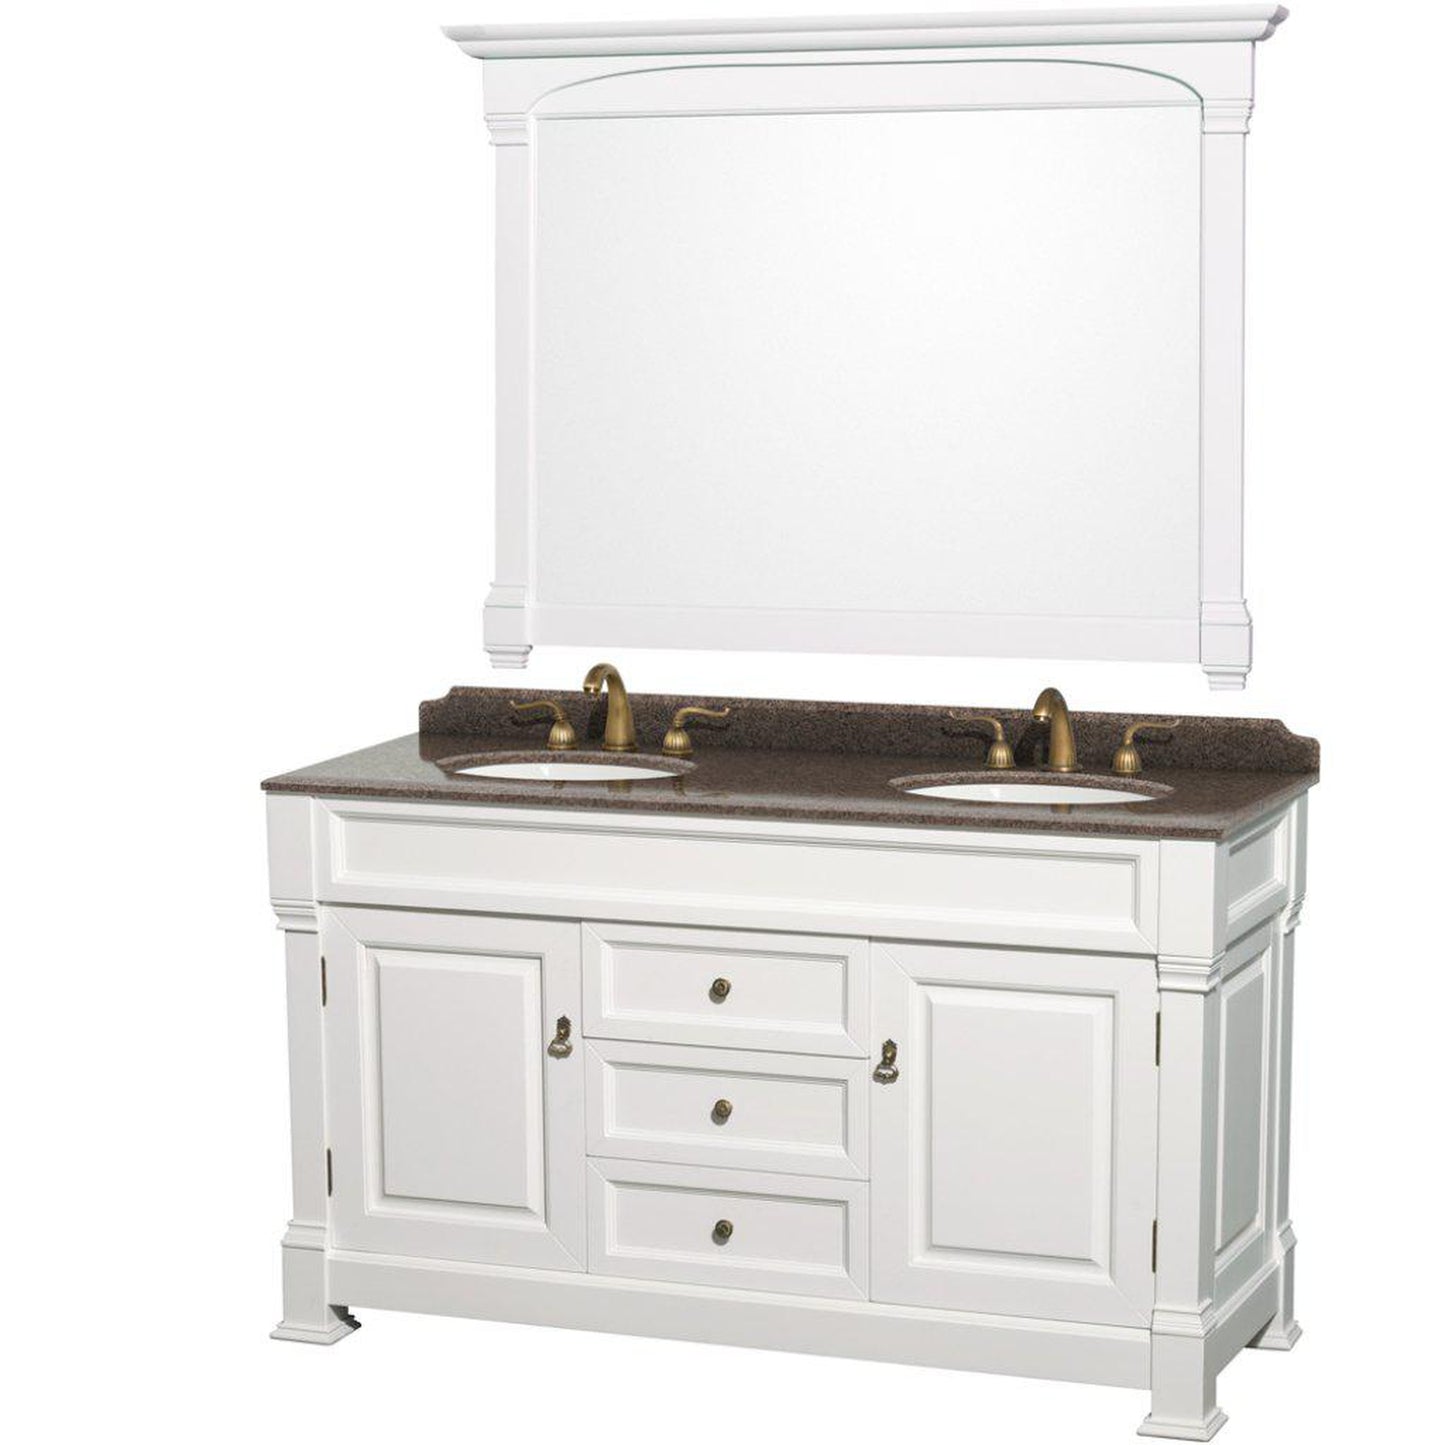 Wyndham Collection Andover 60" Double Bathroom White Vanity Set With Imperial Brown Granite Countertop And Undermount Oval Sink, And 56" Mirror